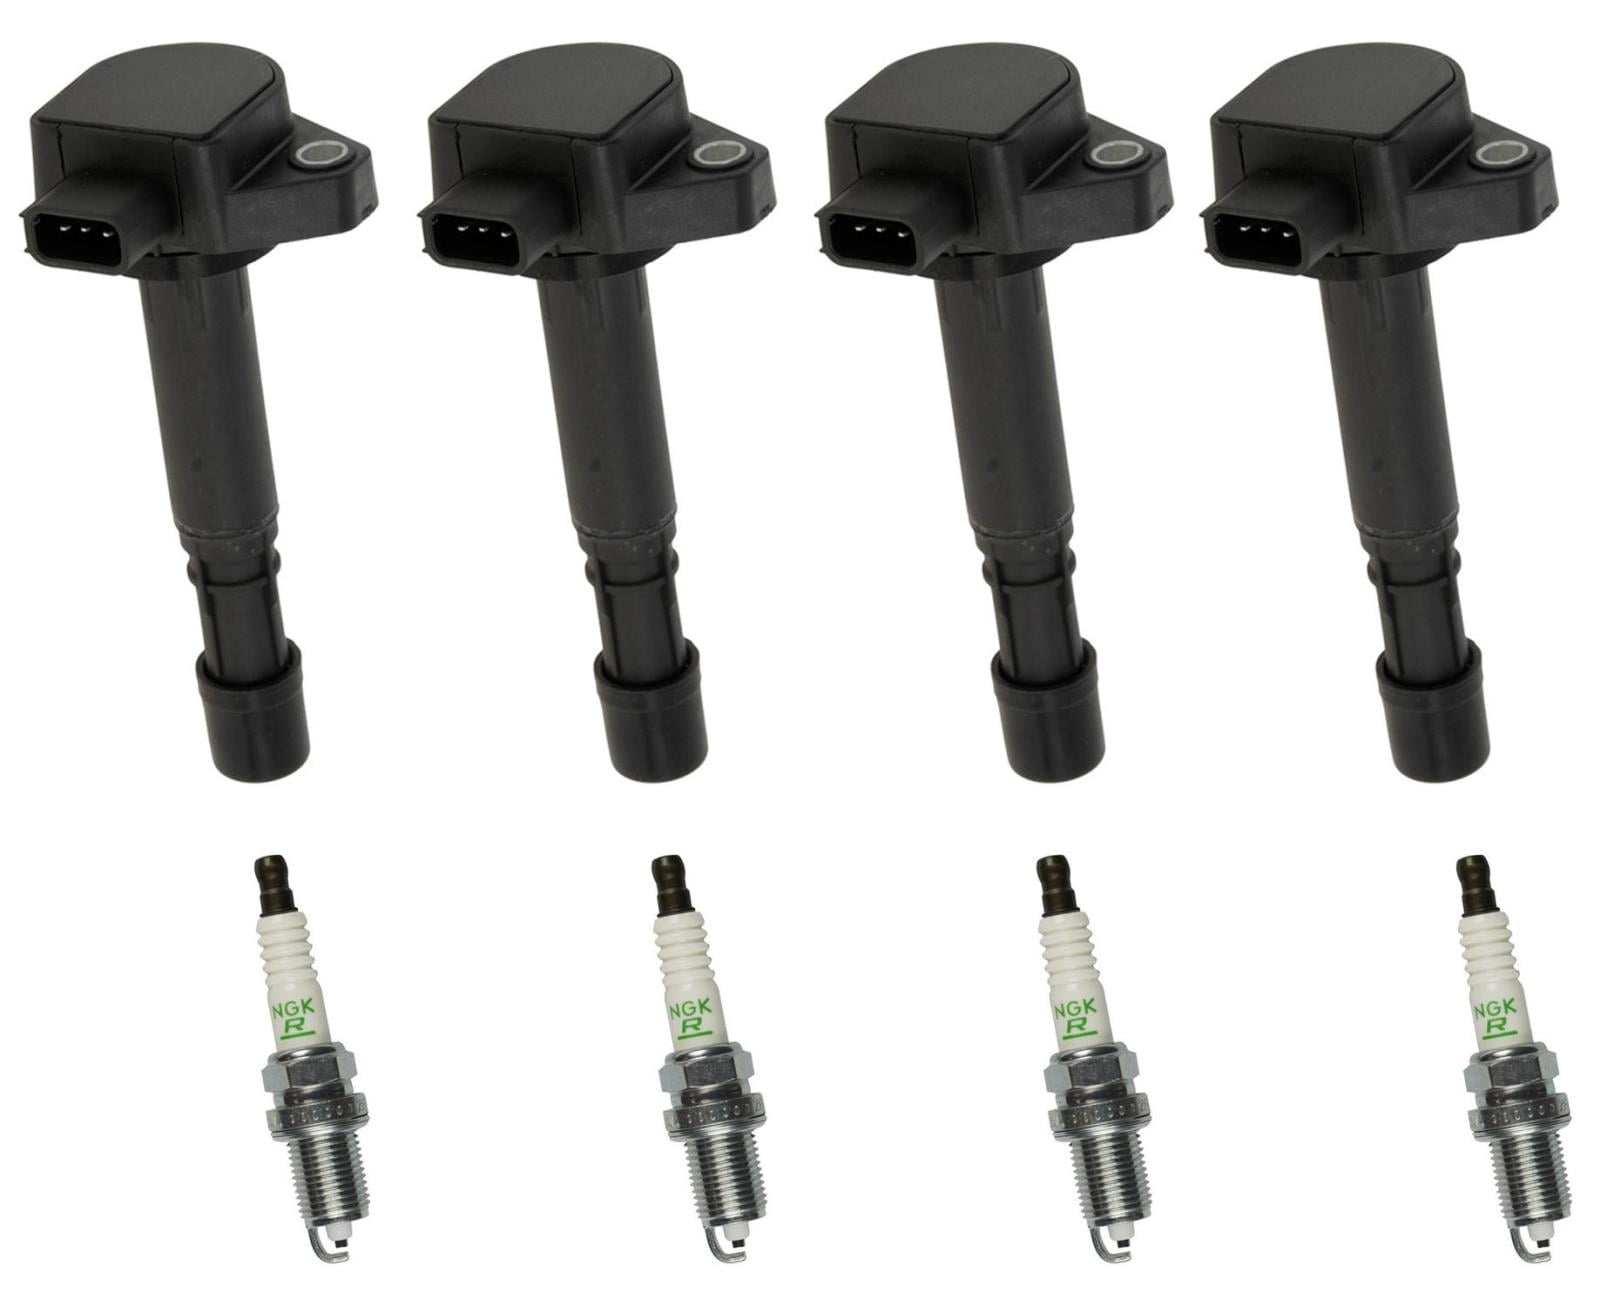 6 pc Denso Direct Ignition Coils for 2002-2008 Jeep Liberty 3.7L V6 Spark rm